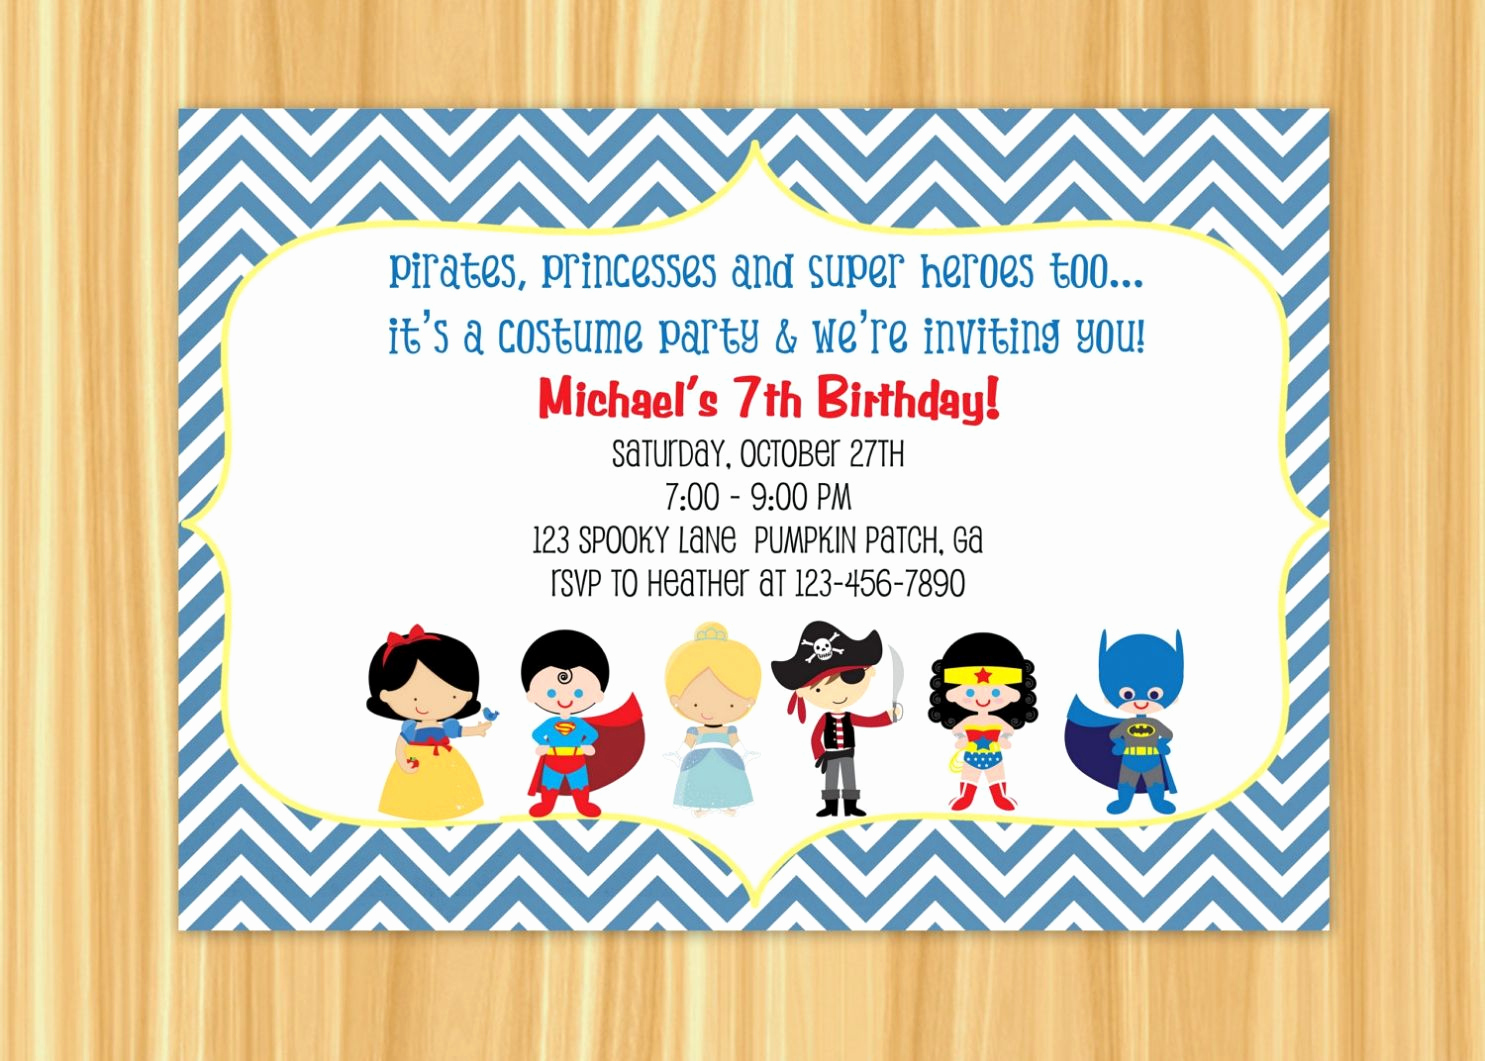 Surprise Graduation Party Invitation Wording Beautiful Costume Party Invitations to Inspire You In Making Awesome